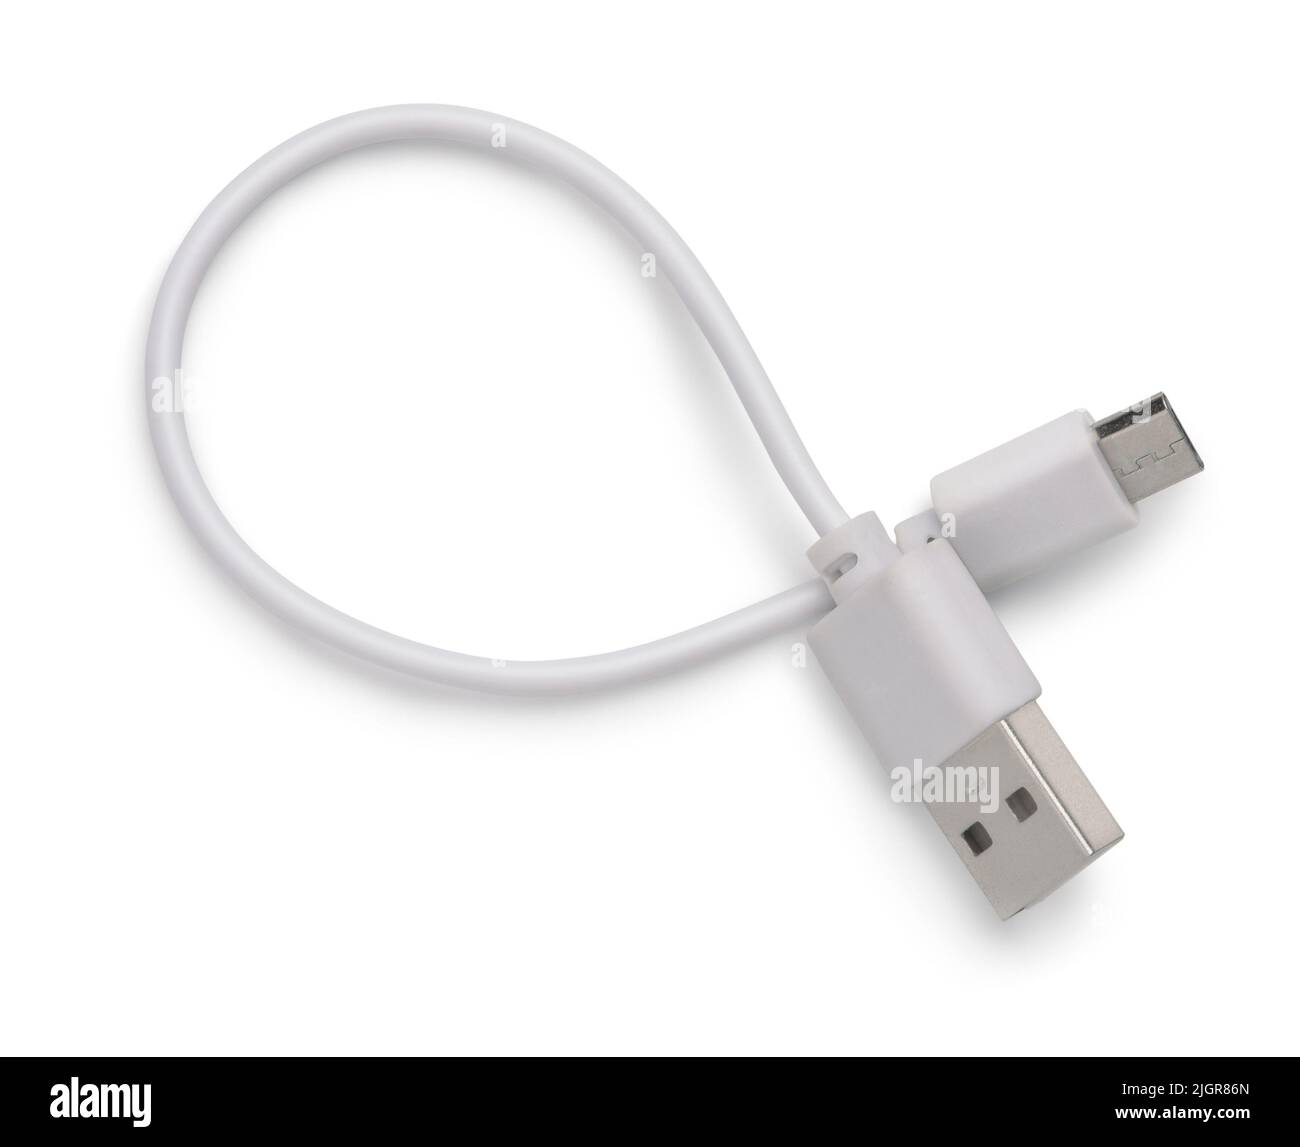 Top view of short gray USB OTG cable isolated on white Stock Photo